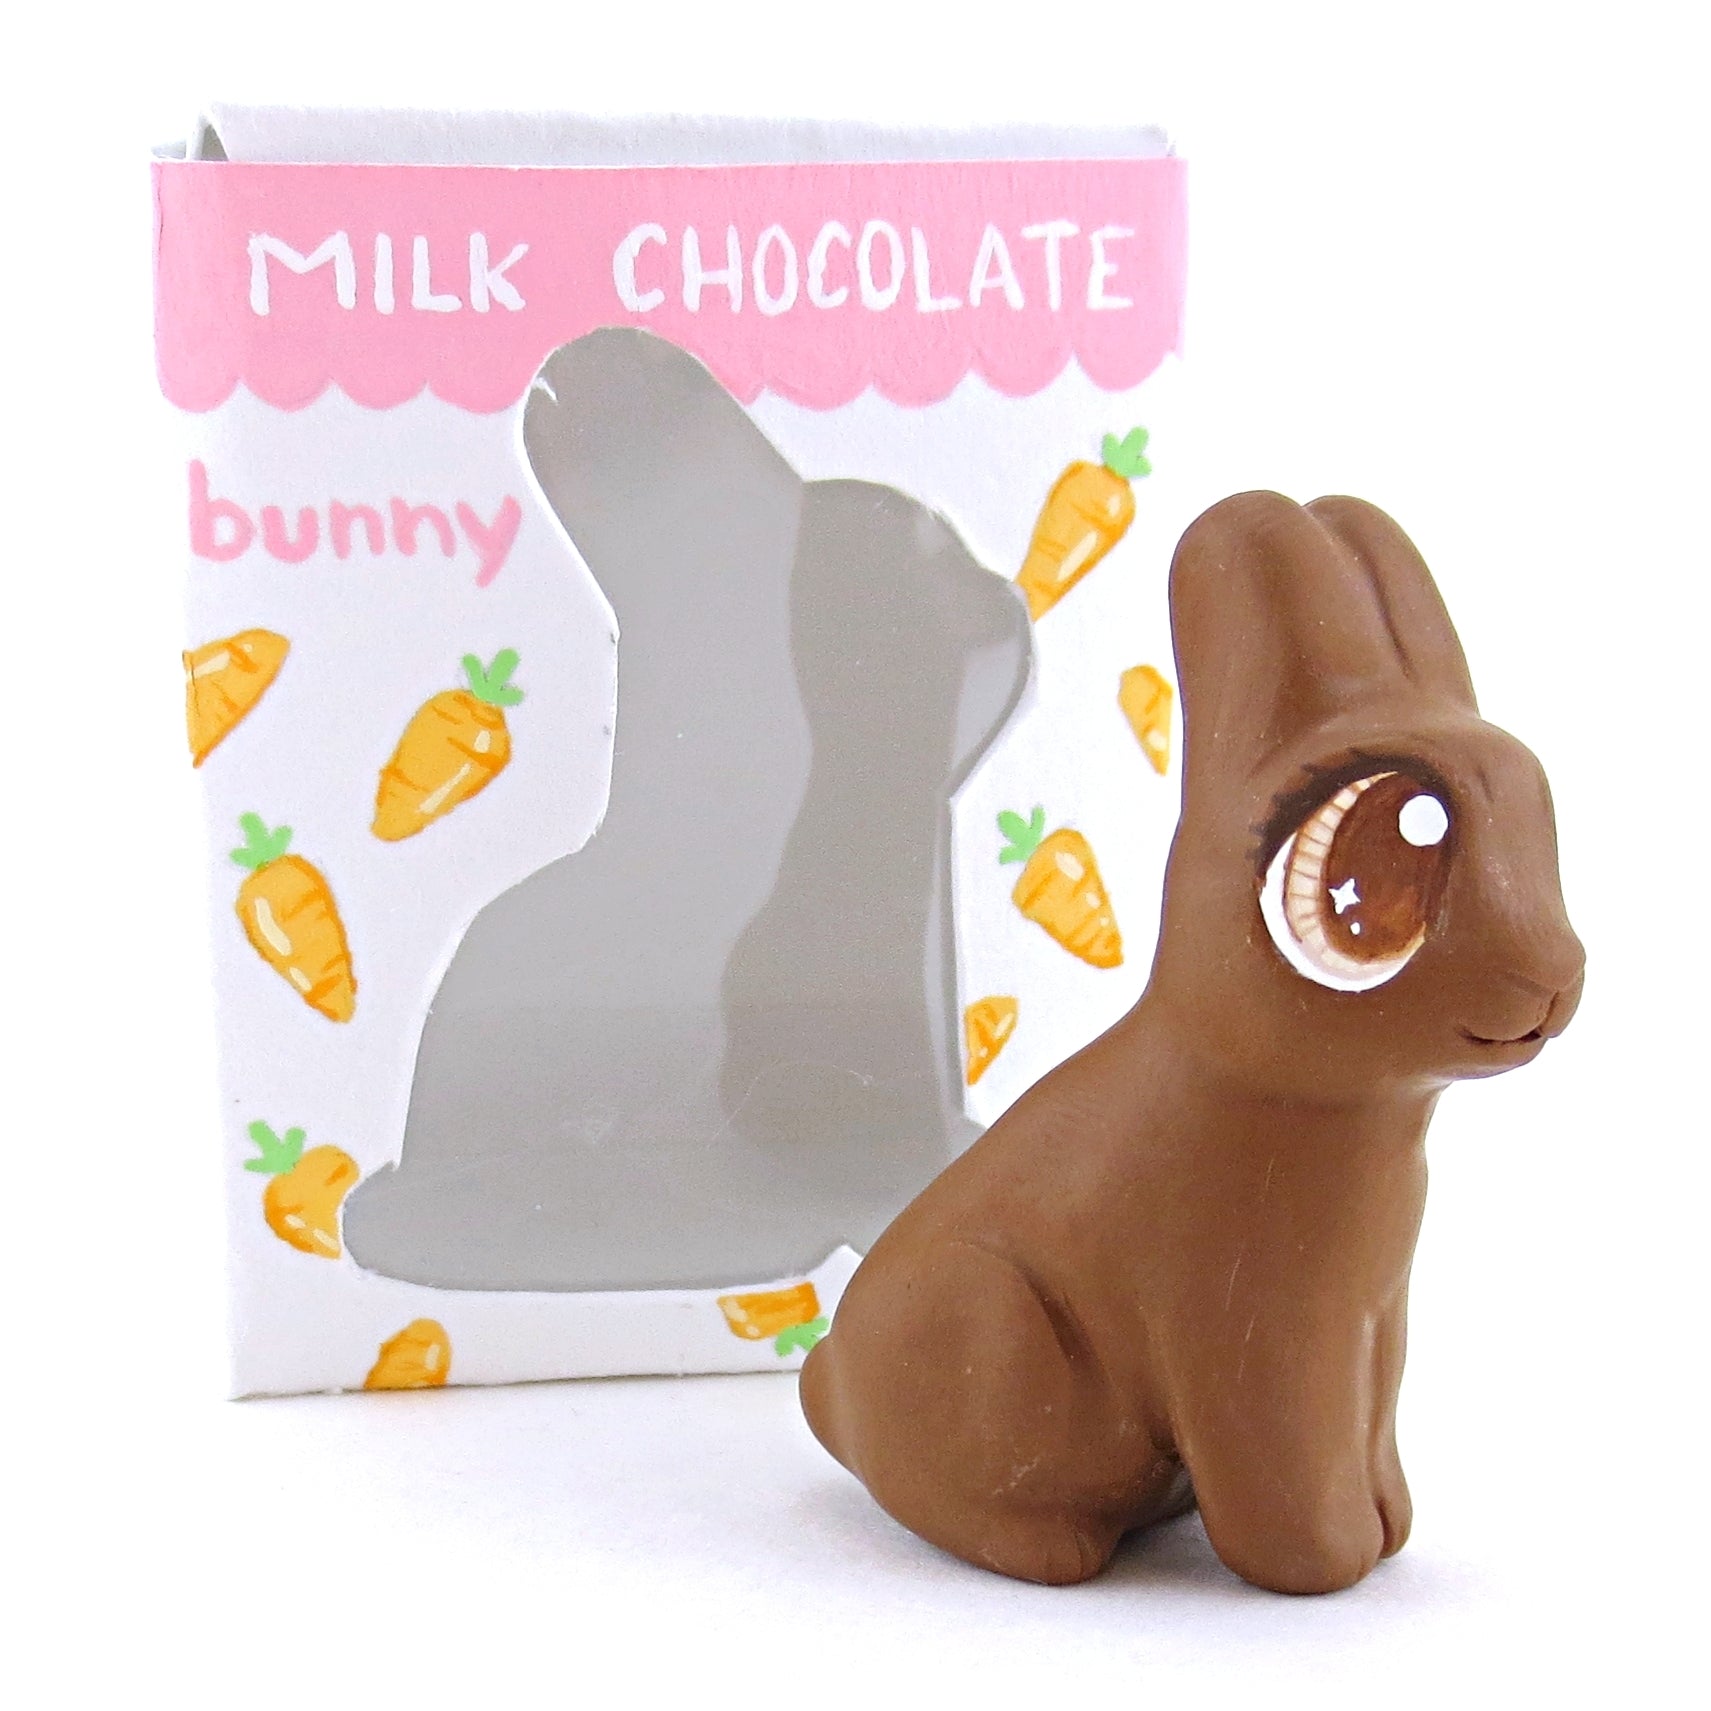 Milk Chocolate Easter Bunny Figurine - Polymer Clay Easter and Spring Animals